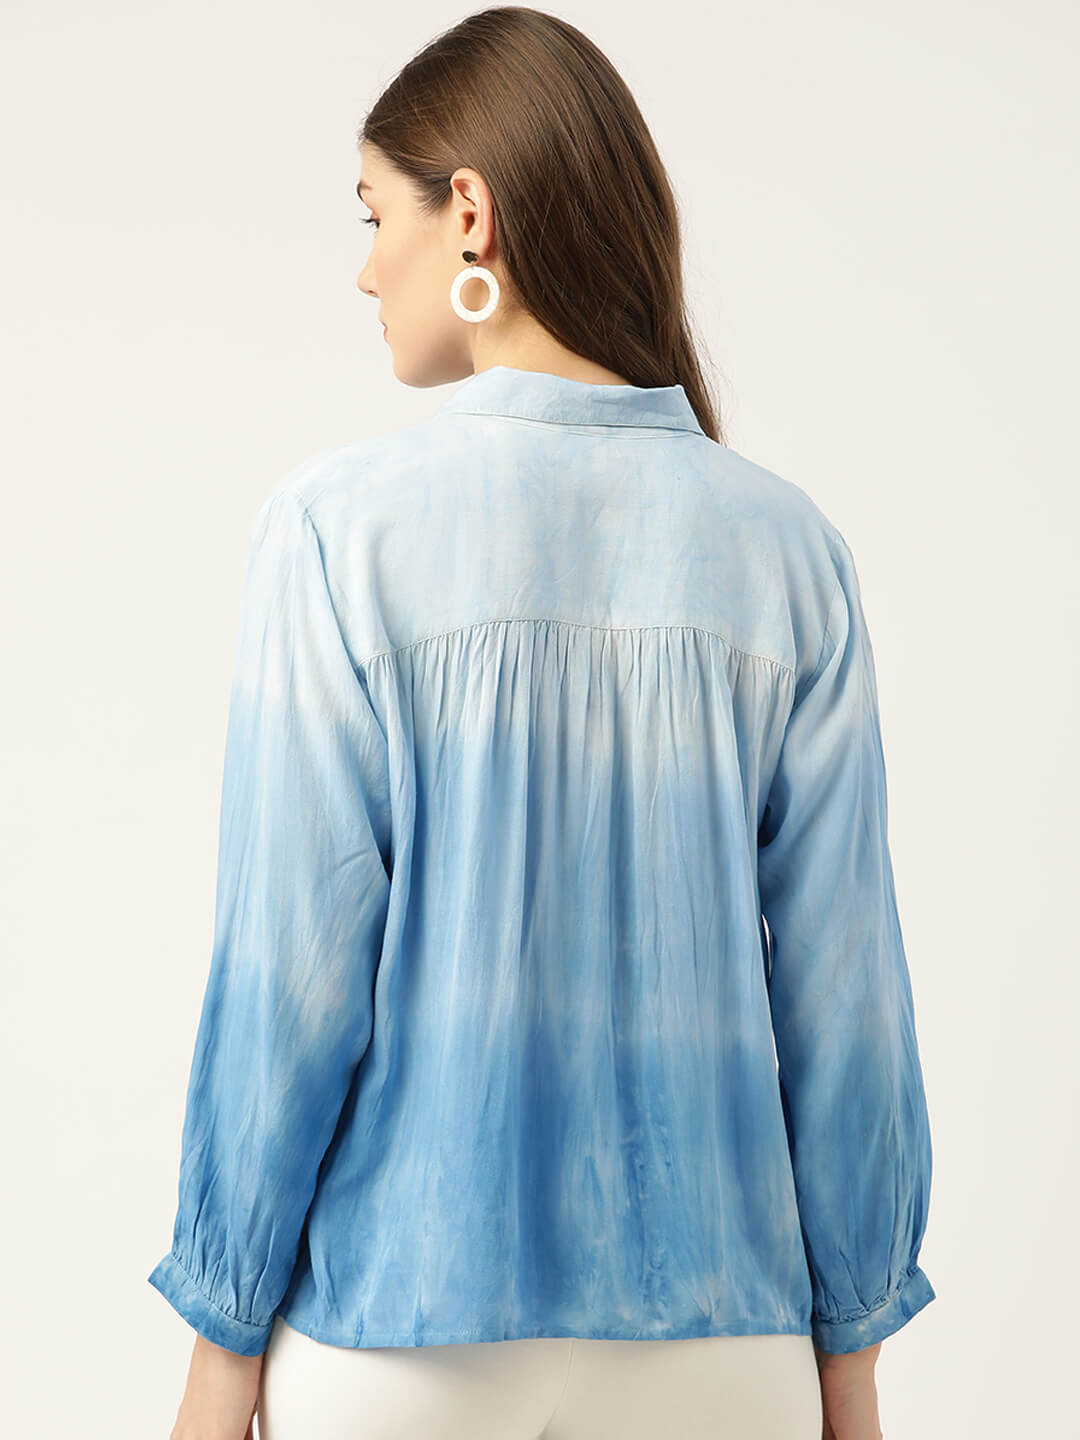 Blue Hand Dyed Tie-Dye Rayon Loose Fit Shirt